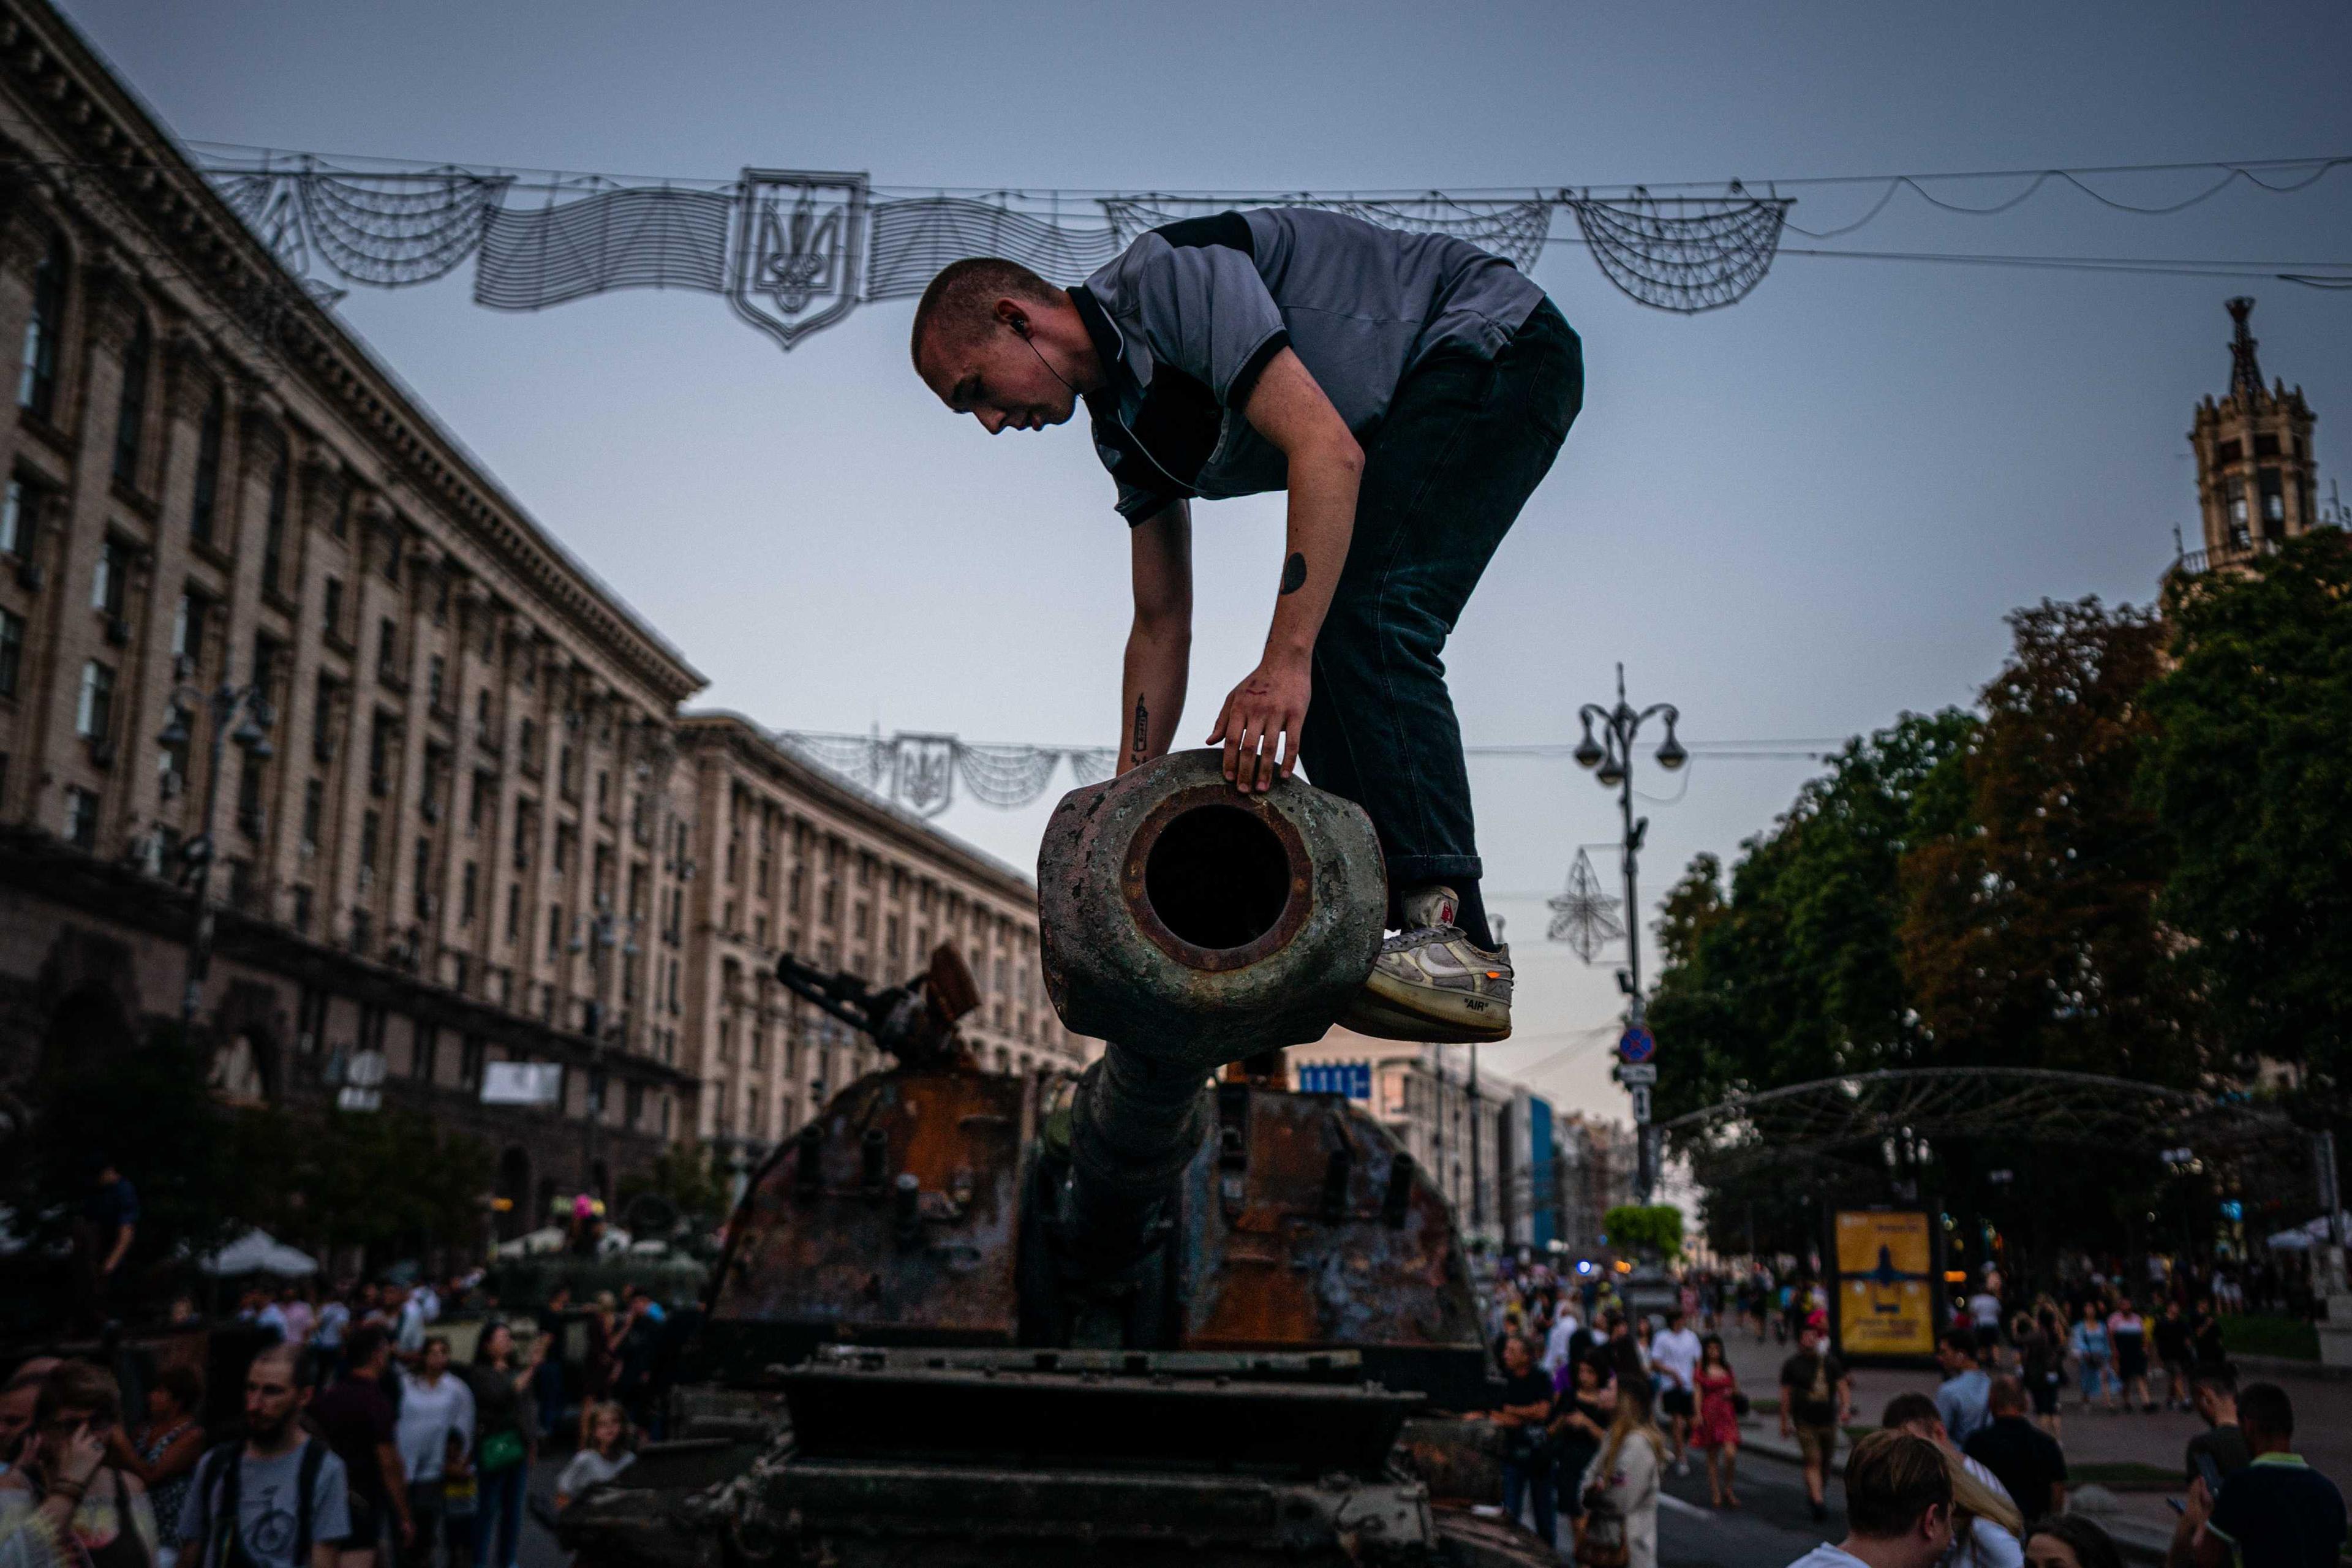 In this photograph taken on Aug 21, a man climbs on a destroyed Russian tank at Khreshchatyk street in Kyiv, that has been turned into an open-air military museum ahead of Ukraine's Independence Day on Aug 24, amid Russia's invasion of Ukraine. Photo: AFP 